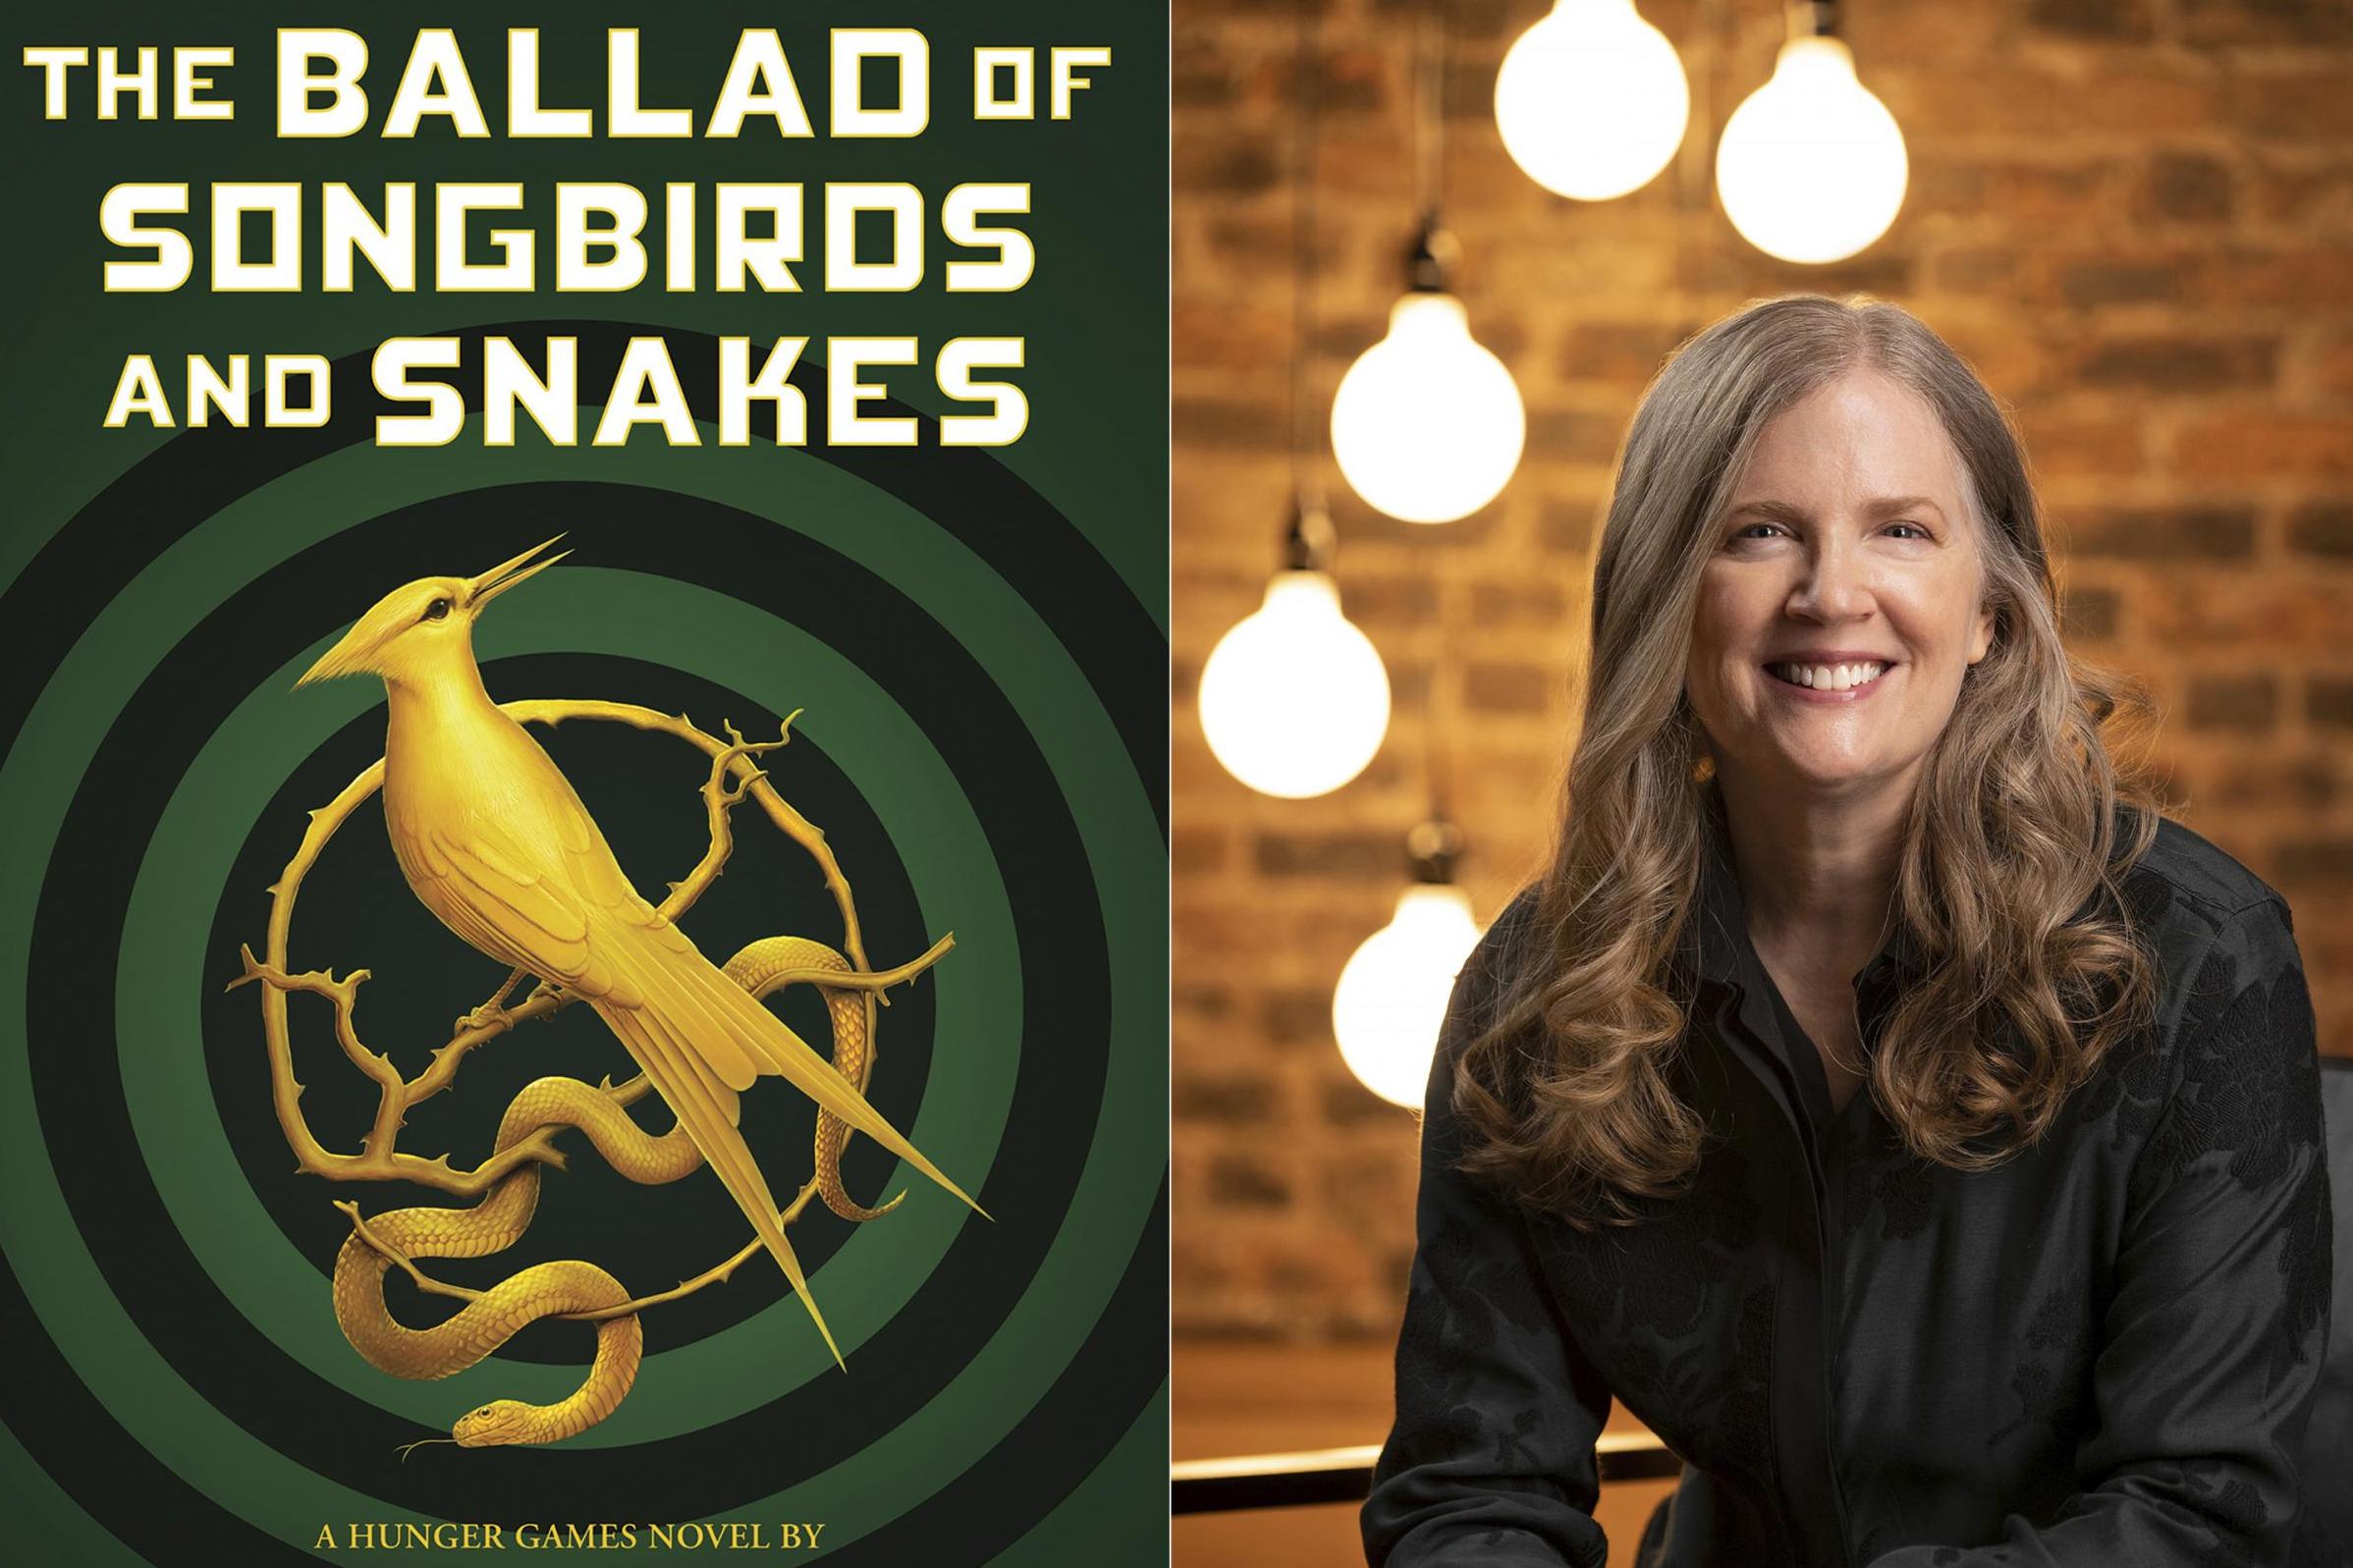 Review: 'The Hunger Games: The Ballad of Songbirds and Snakes